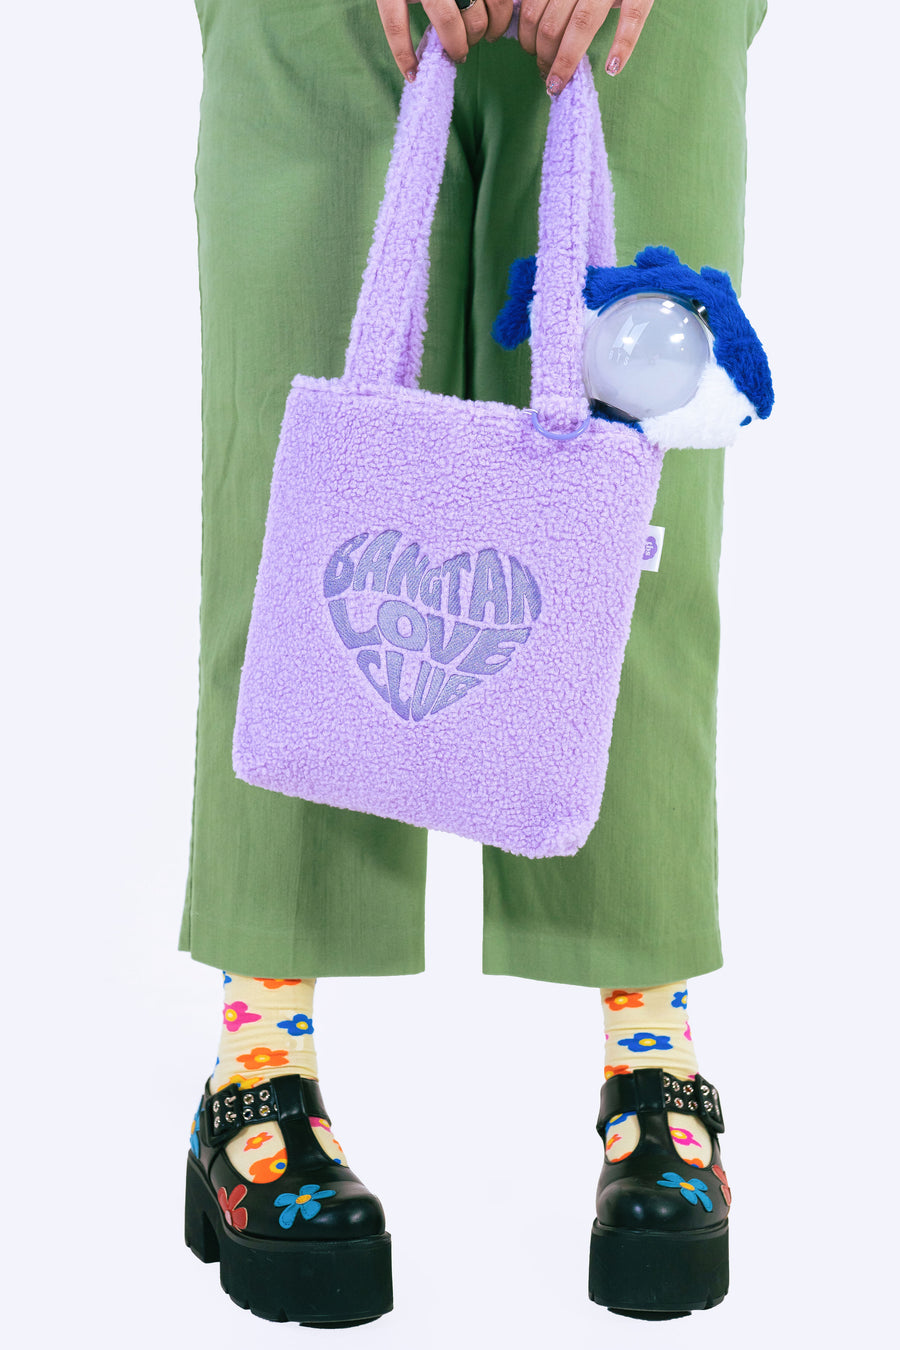 Love Club Tote Bags (Boy Groups) [PREORDER ENDED]